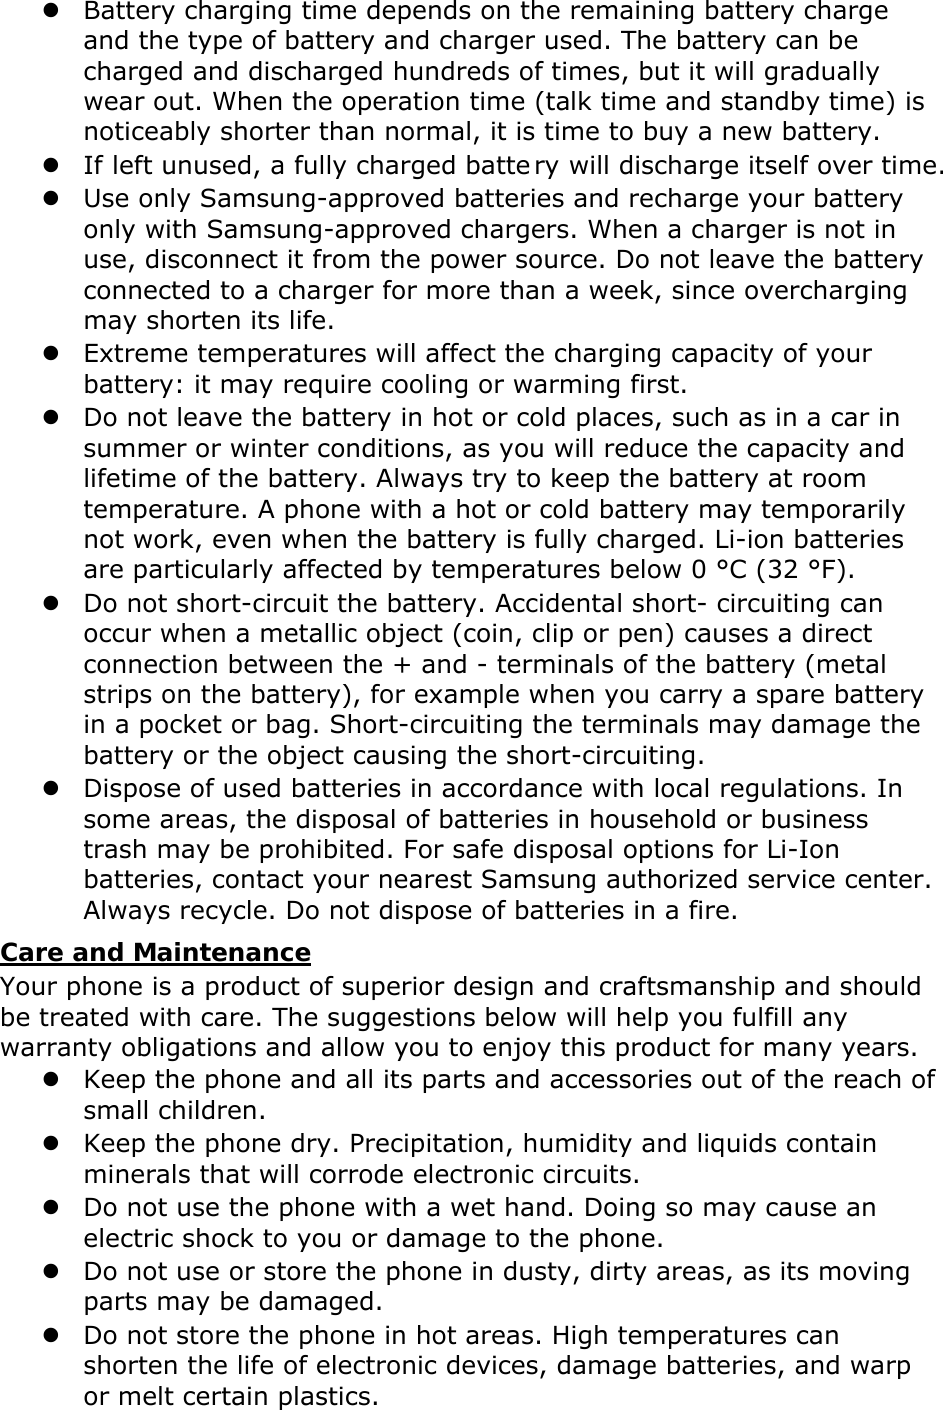  Battery charging time depends on the remaining battery charge and the type of battery and charger used. The battery can be charged and discharged hundreds of times, but it will gradually wear out. When the operation time (talk time and standby time) is noticeably shorter than normal, it is time to buy a new battery.  If left unused, a fully charged batte ry will discharge itself over time.  Use only Samsung-approved batteries and recharge your battery only with Samsung-approved chargers. When a charger is not in use, disconnect it from the power source. Do not leave the battery connected to a charger for more than a week, since overcharging may shorten its life.  Extreme temperatures will affect the charging capacity of your battery: it may require cooling or warming first.  Do not leave the battery in hot or cold places, such as in a car in summer or winter conditions, as you will reduce the capacity and lifetime of the battery. Always try to keep the battery at room temperature. A phone with a hot or cold battery may temporarily not work, even when the battery is fully charged. Li-ion batteries are particularly affected by temperatures below 0 °C (32 °F).  Do not short-circuit the battery. Accidental short- circuiting can occur when a metallic object (coin, clip or pen) causes a direct connection between the + and - terminals of the battery (metal strips on the battery), for example when you carry a spare battery in a pocket or bag. Short-circuiting the terminals may damage the battery or the object causing the short-circuiting.  Dispose of used batteries in accordance with local regulations. In some areas, the disposal of batteries in household or business trash may be prohibited. For safe disposal options for Li-Ion batteries, contact your nearest Samsung authorized service center. Always recycle. Do not dispose of batteries in a fire. Care and Maintenance Your phone is a product of superior design and craftsmanship and should be treated with care. The suggestions below will help you fulfill any warranty obligations and allow you to enjoy this product for many years.  Keep the phone and all its parts and accessories out of the reach of small children.  Keep the phone dry. Precipitation, humidity and liquids contain minerals that will corrode electronic circuits.  Do not use the phone with a wet hand. Doing so may cause an electric shock to you or damage to the phone.  Do not use or store the phone in dusty, dirty areas, as its moving parts may be damaged.  Do not store the phone in hot areas. High temperatures can shorten the life of electronic devices, damage batteries, and warp or melt certain plastics. 